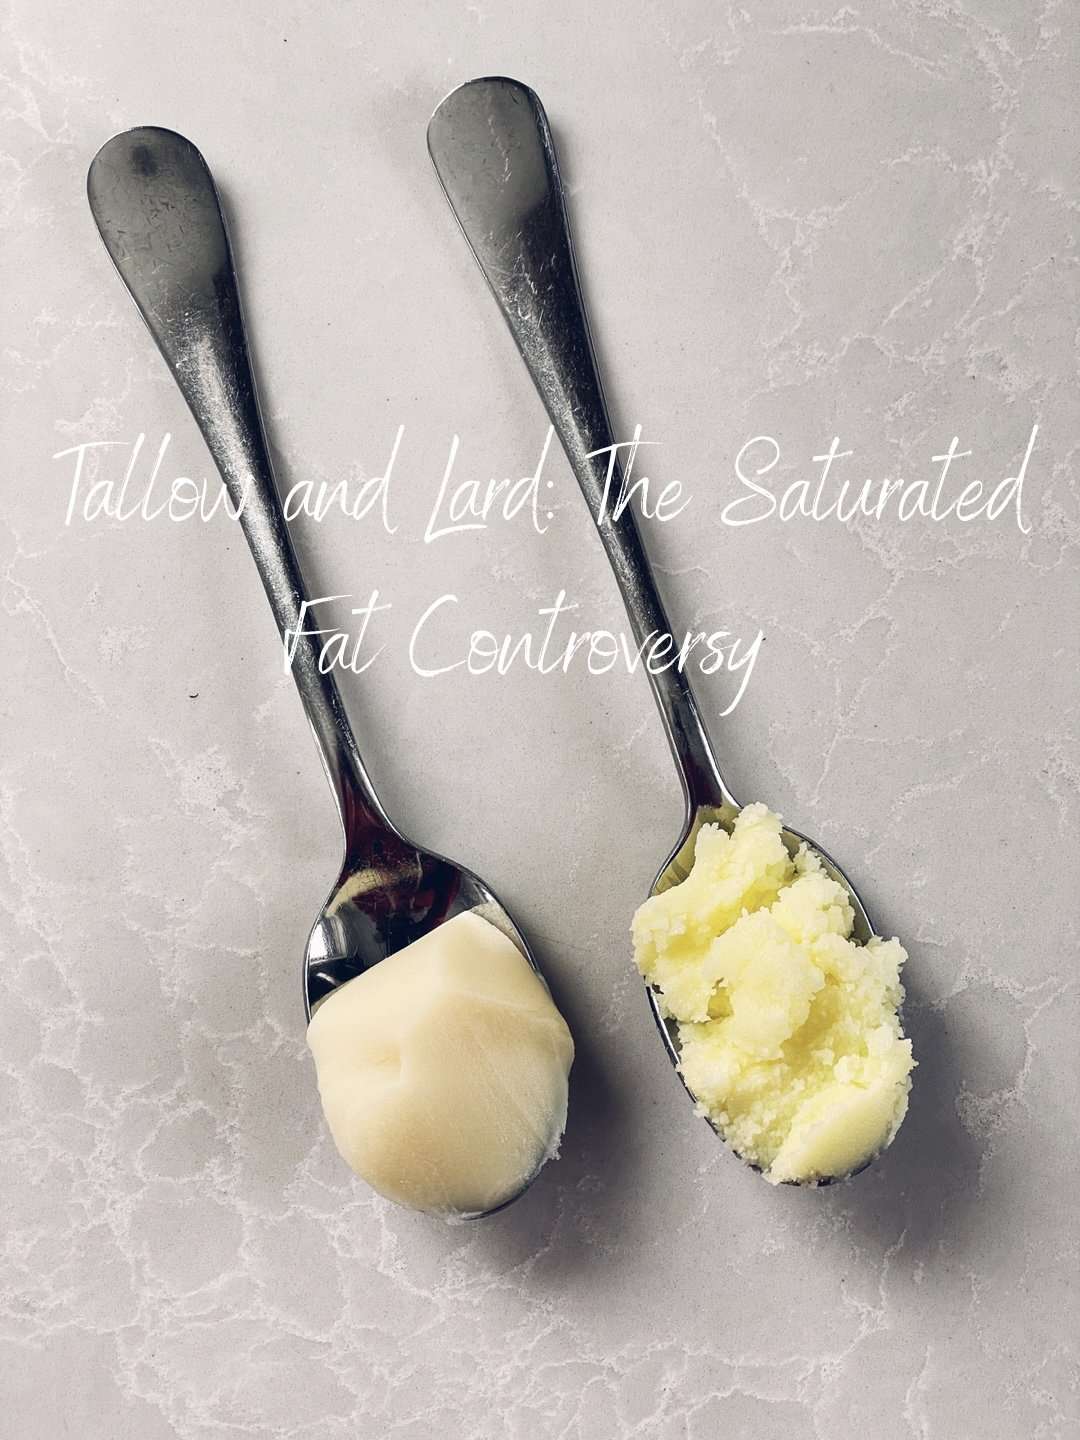 A spoonful of lard next to a spoonful of tallow